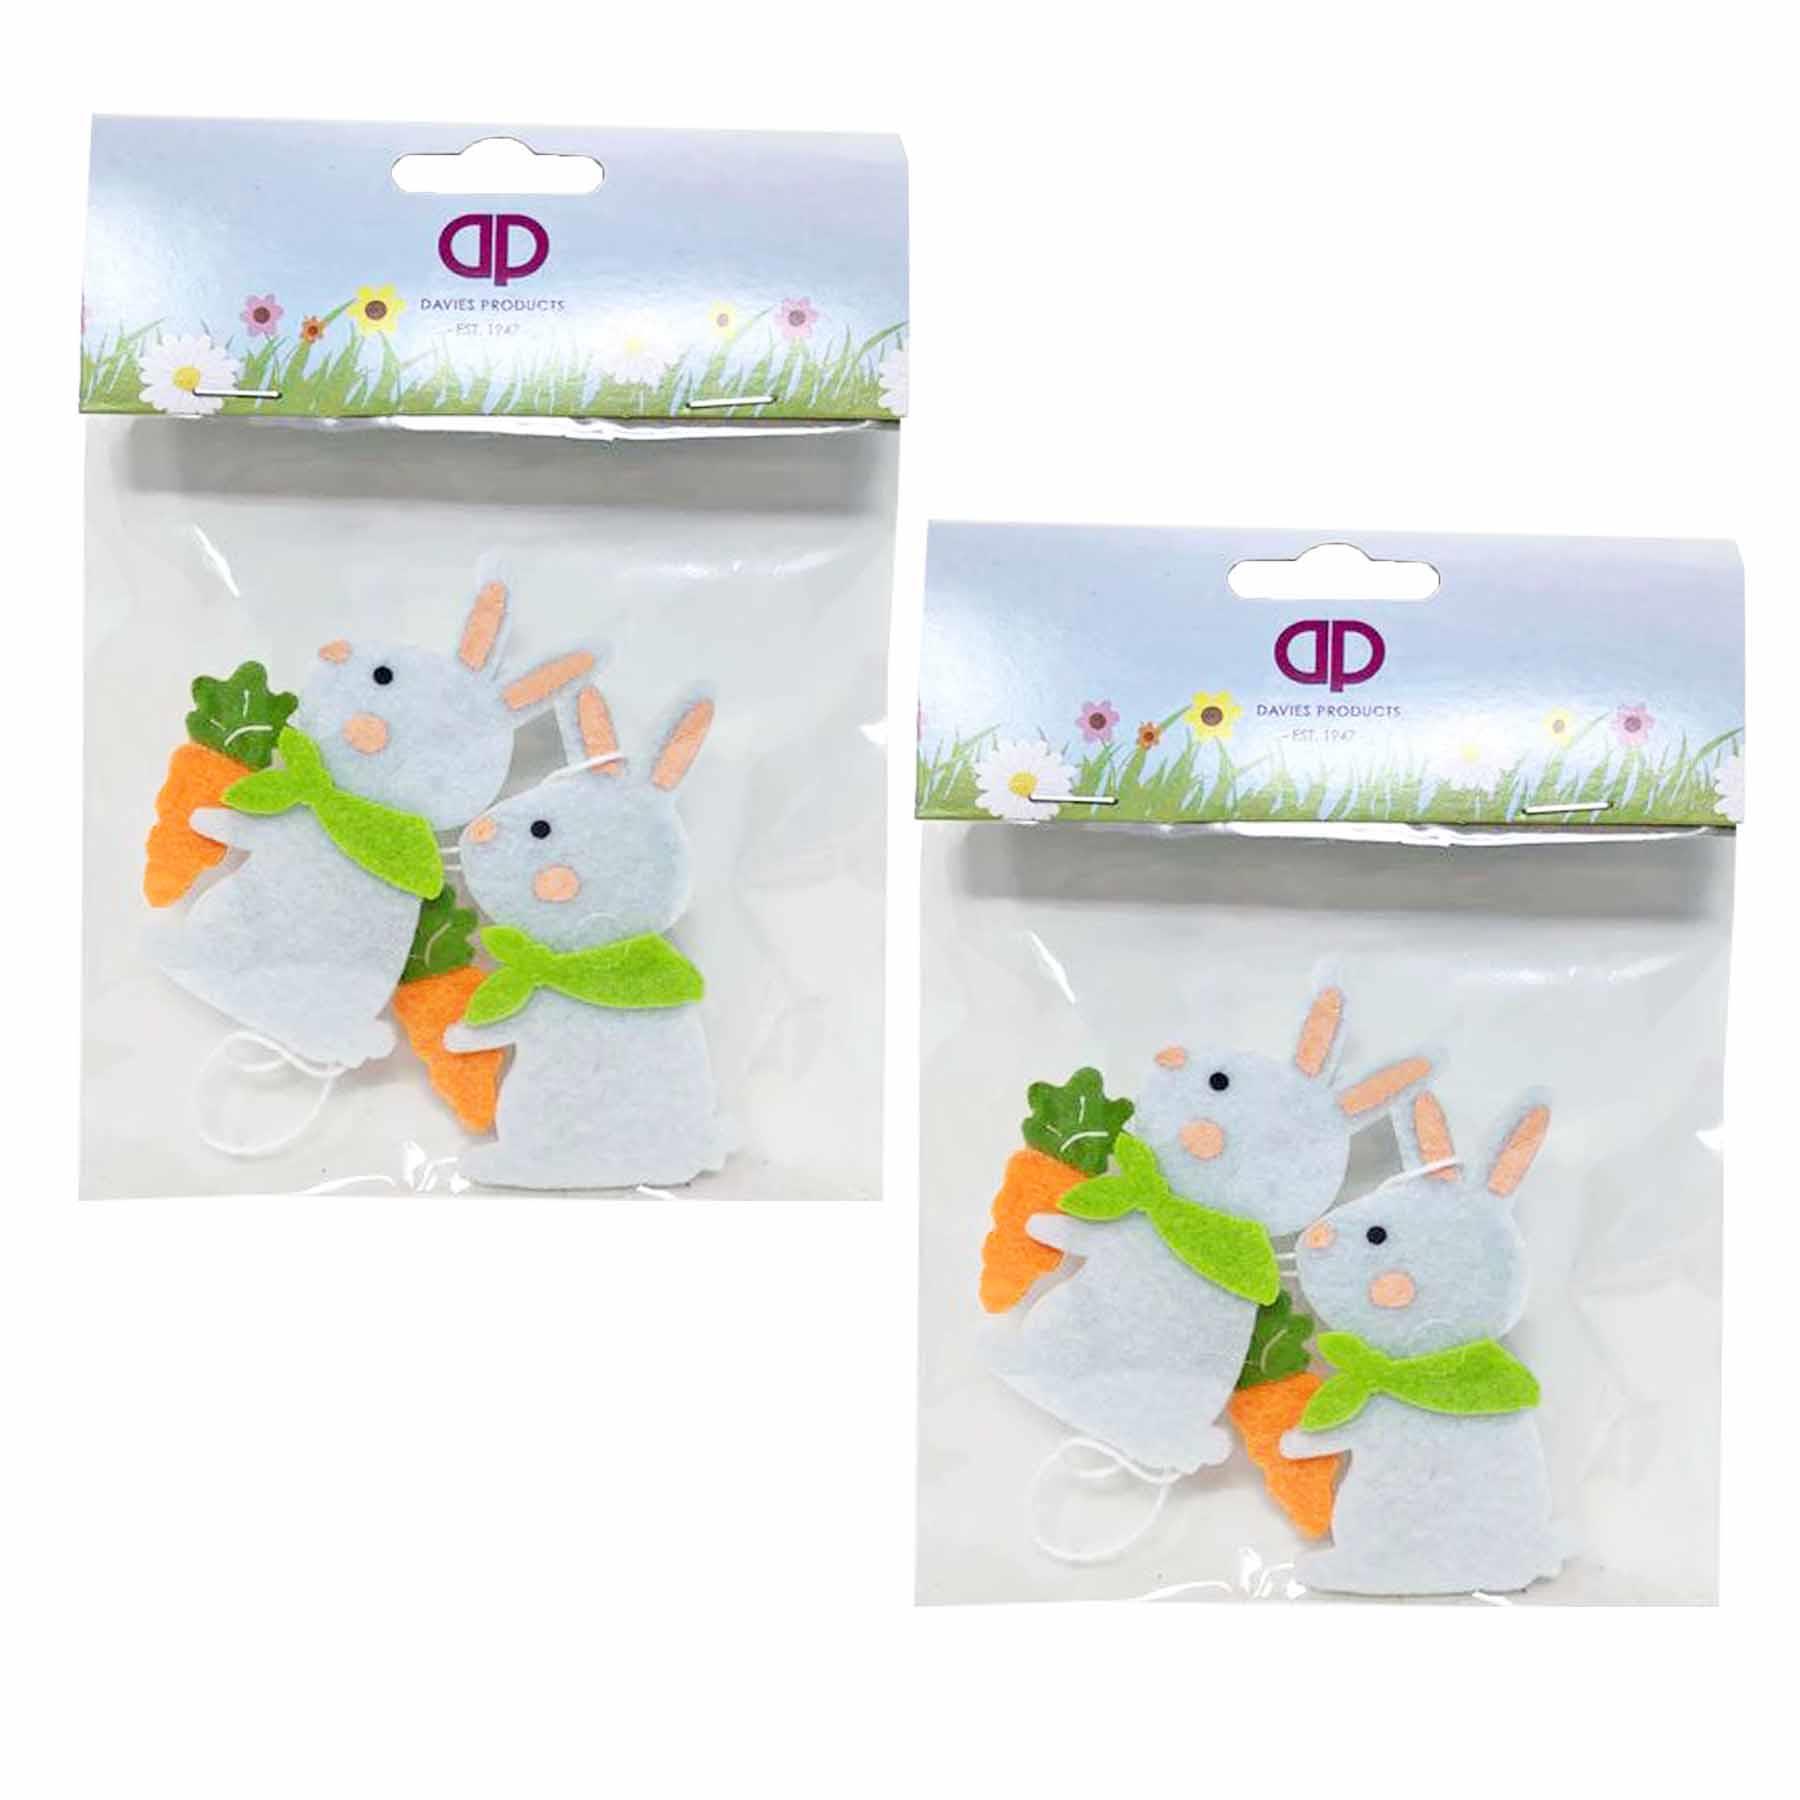 Easter Decorations, Bonnet Making, Arts and Crafts - 4 Pack Felt Bunnies with Carrots